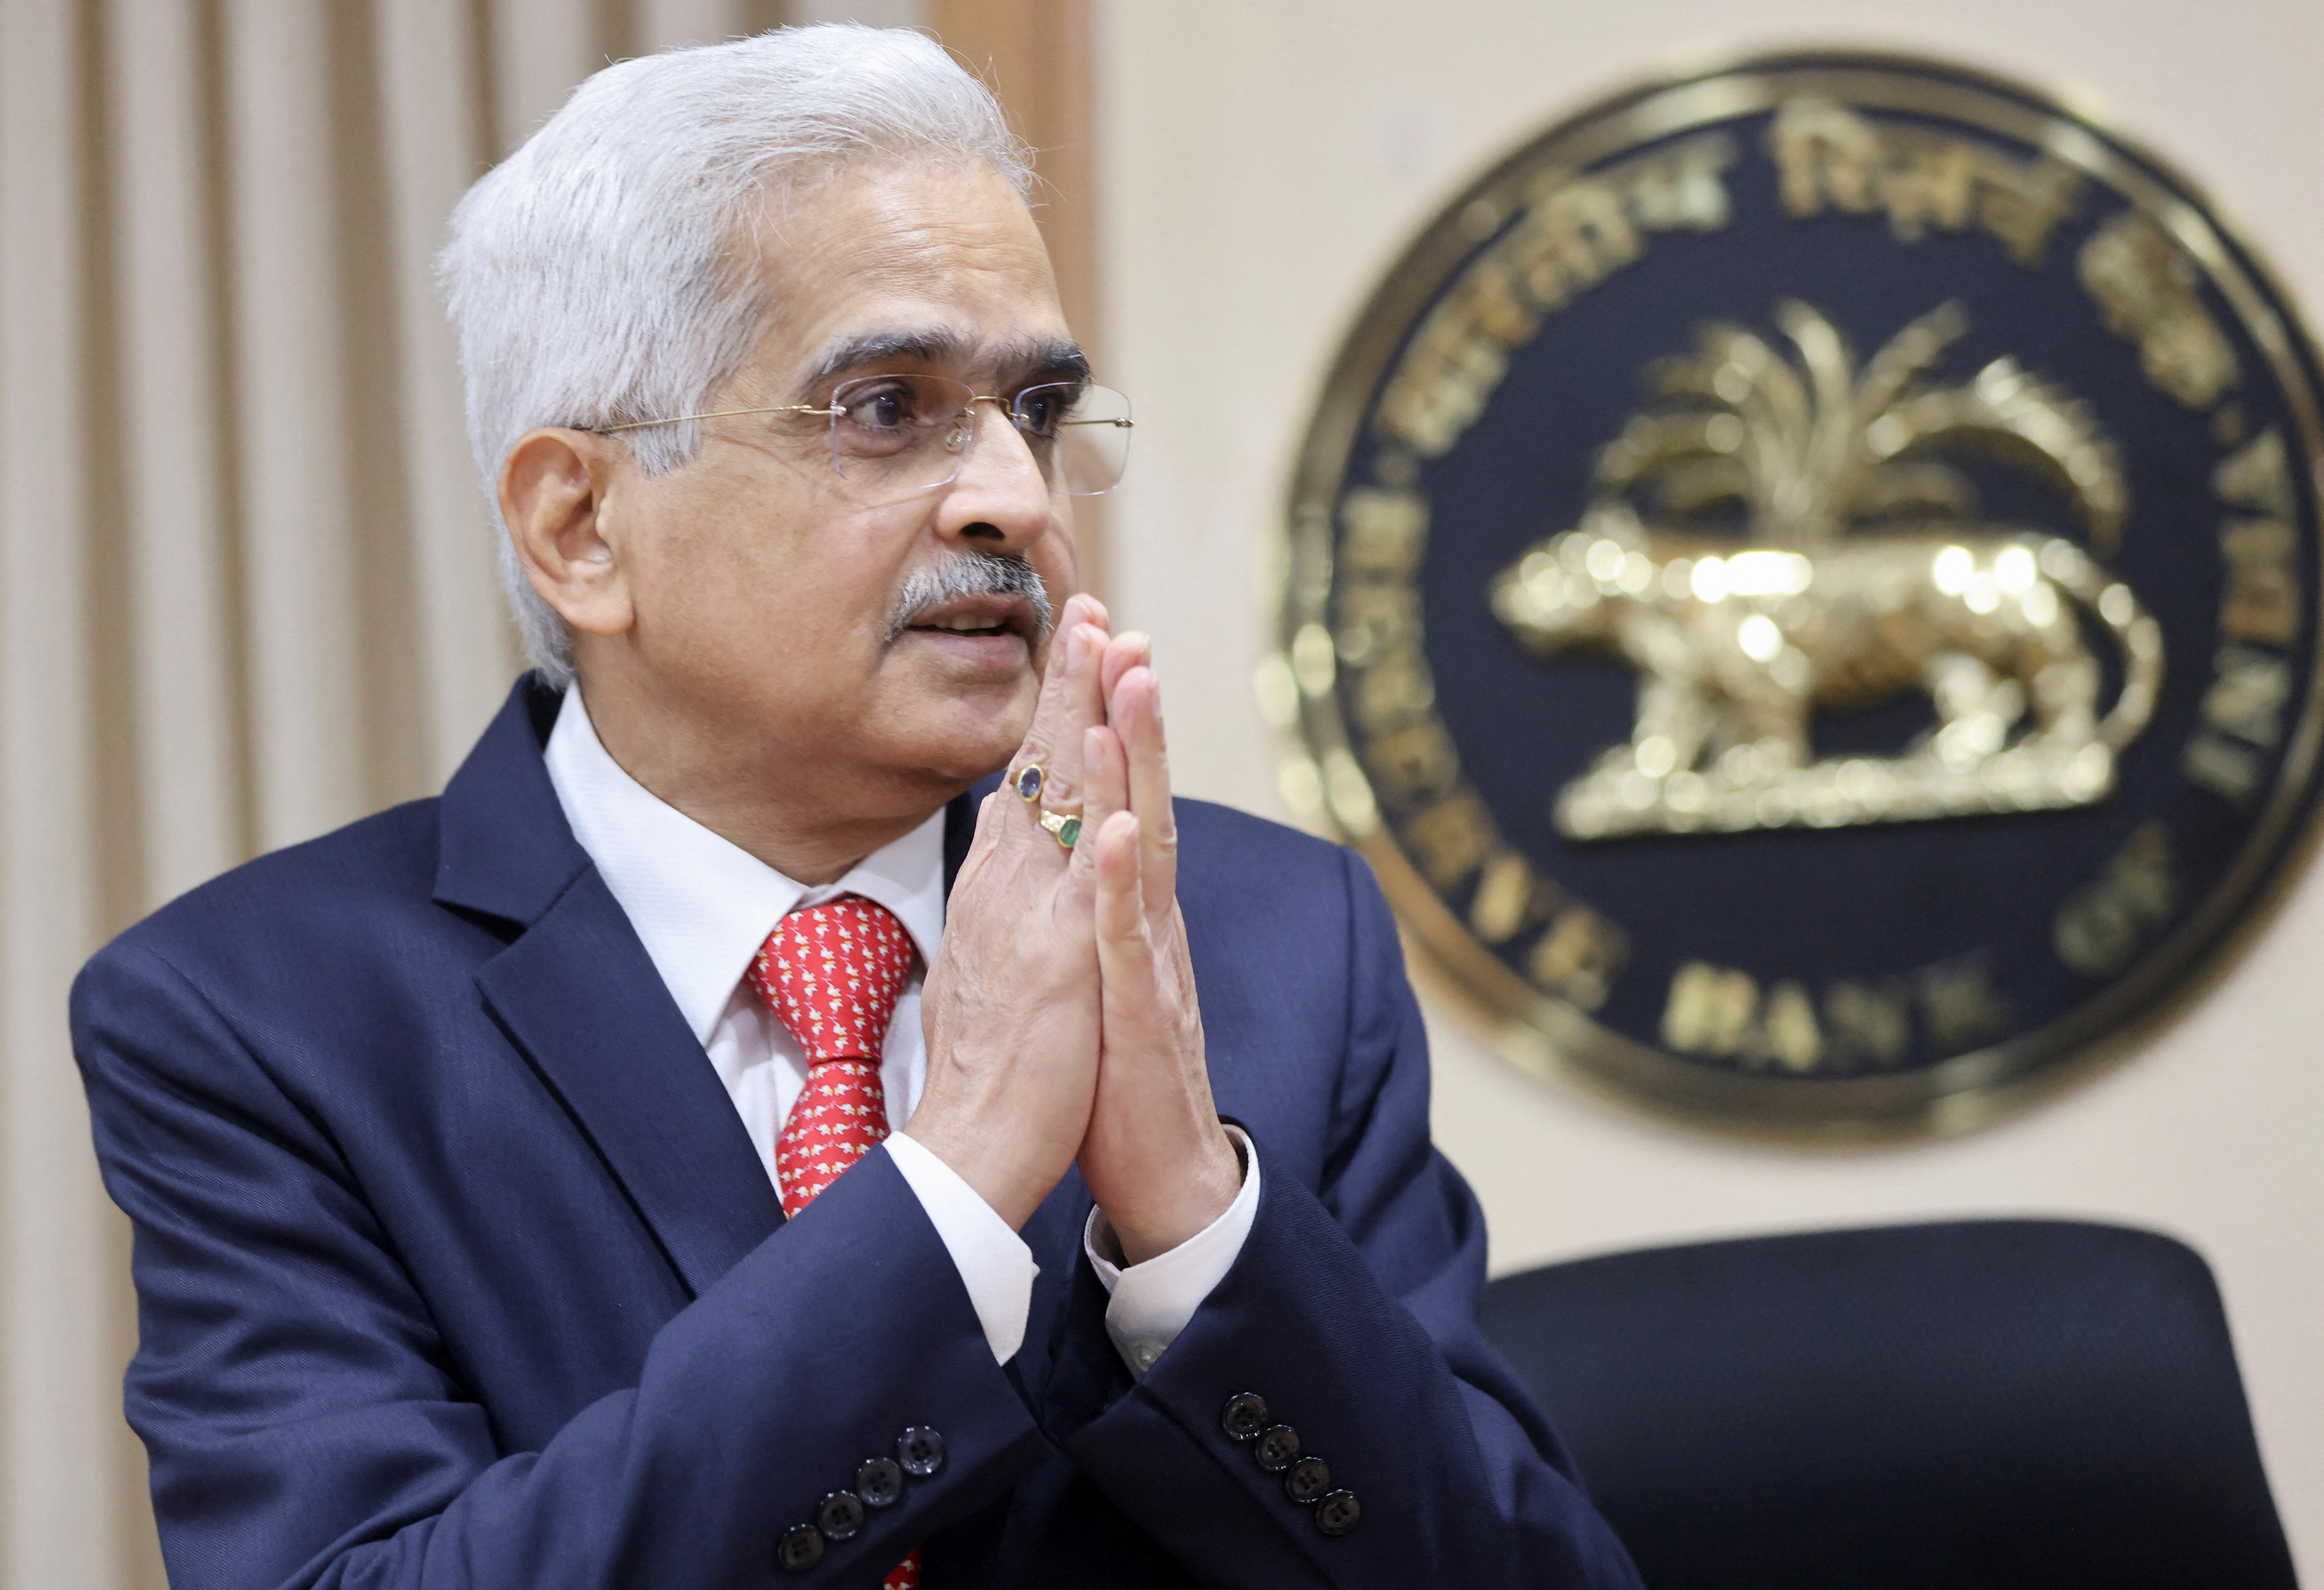 The Reserve Bank of India (RBI) Governor Shaktikanta Das greets the media as he arrives at a news conference after a monetary policy review in Mumbai